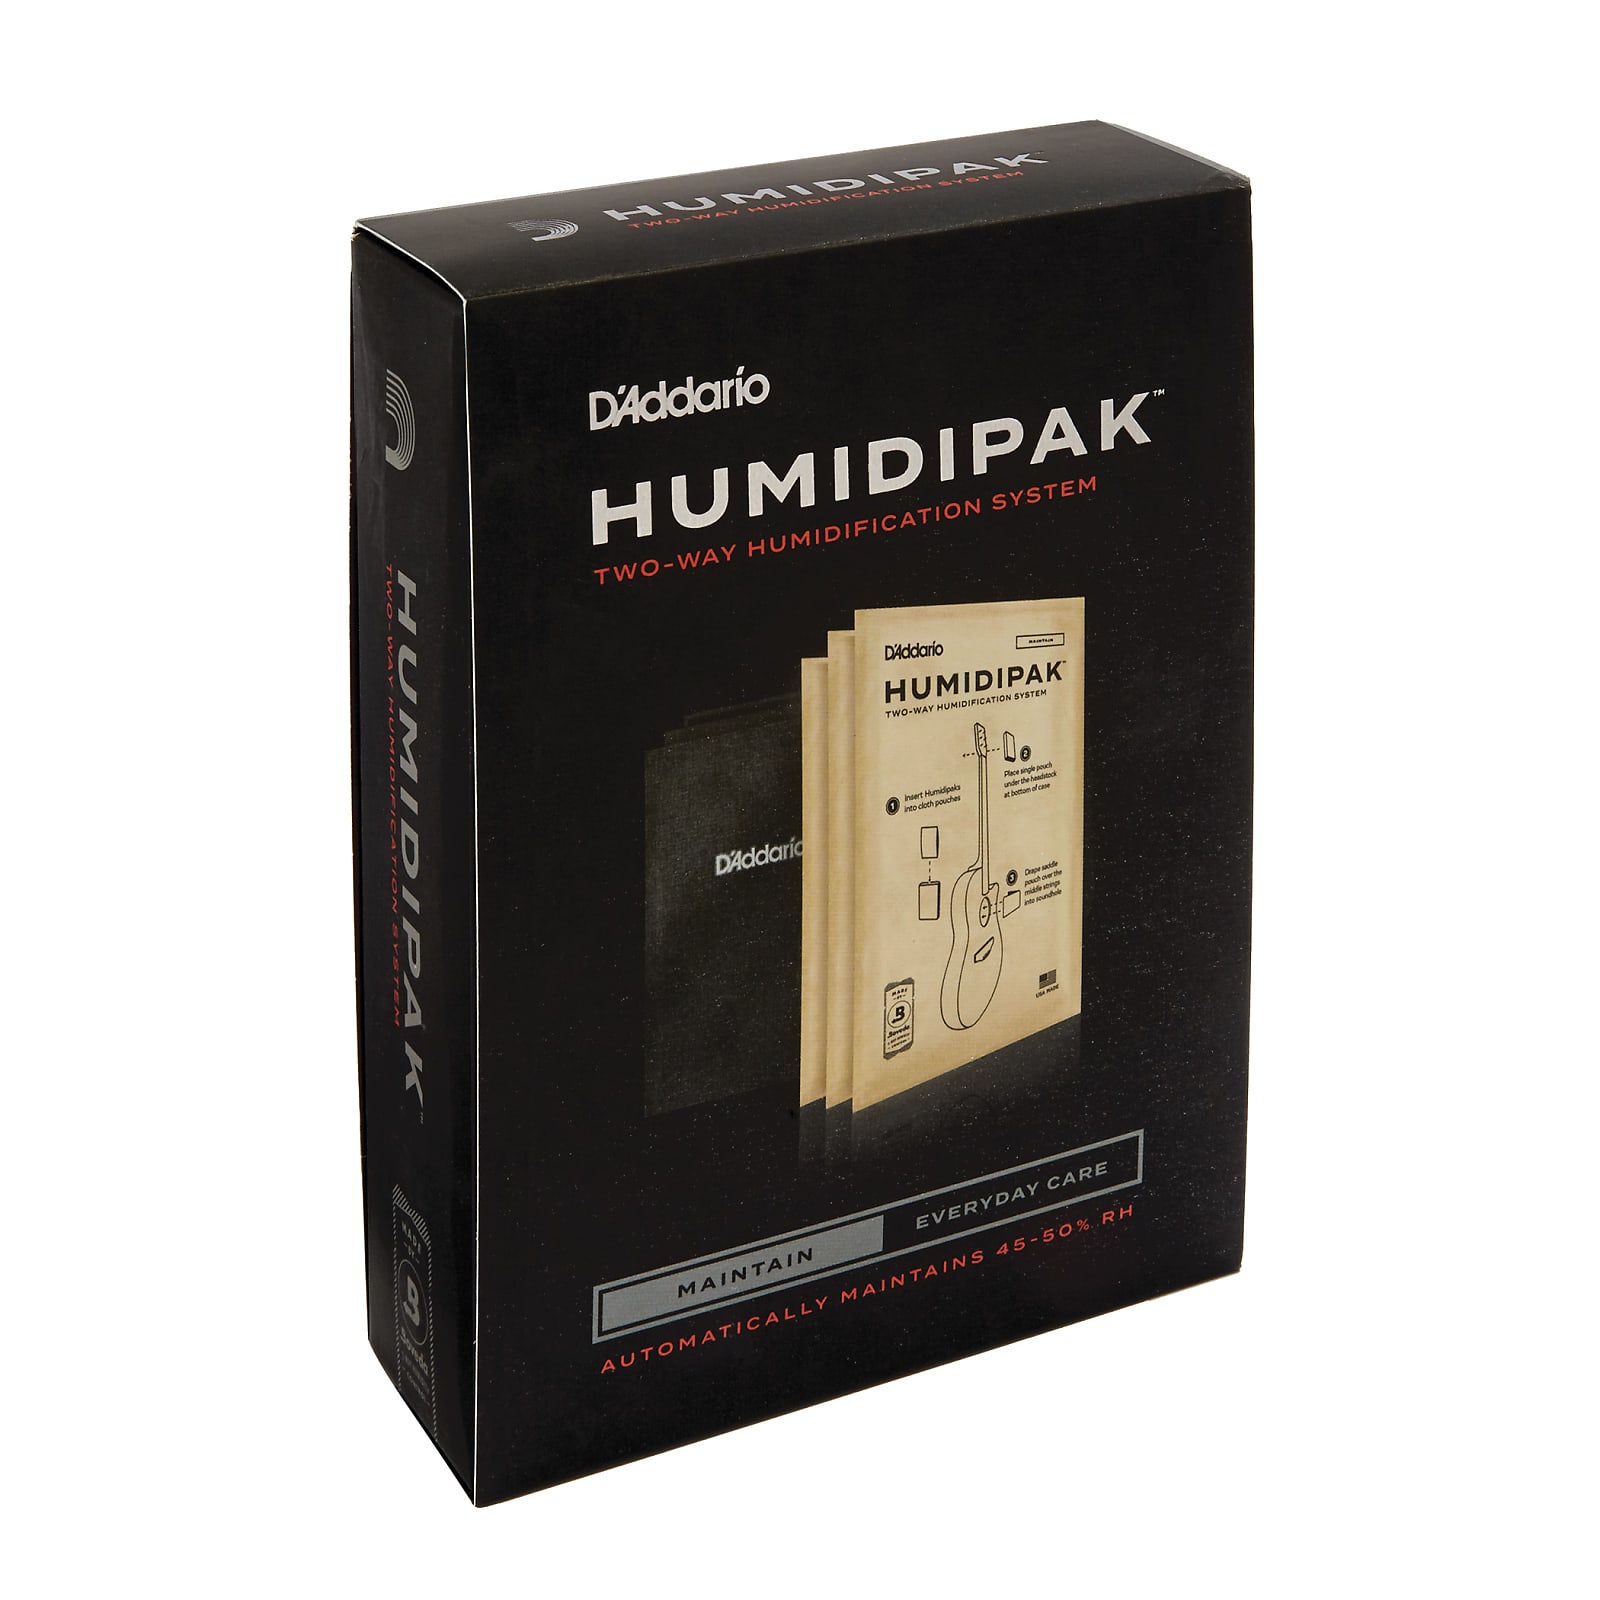 D'Addario Humidipak Maintain Automatic Humidity Control System (for guitar)